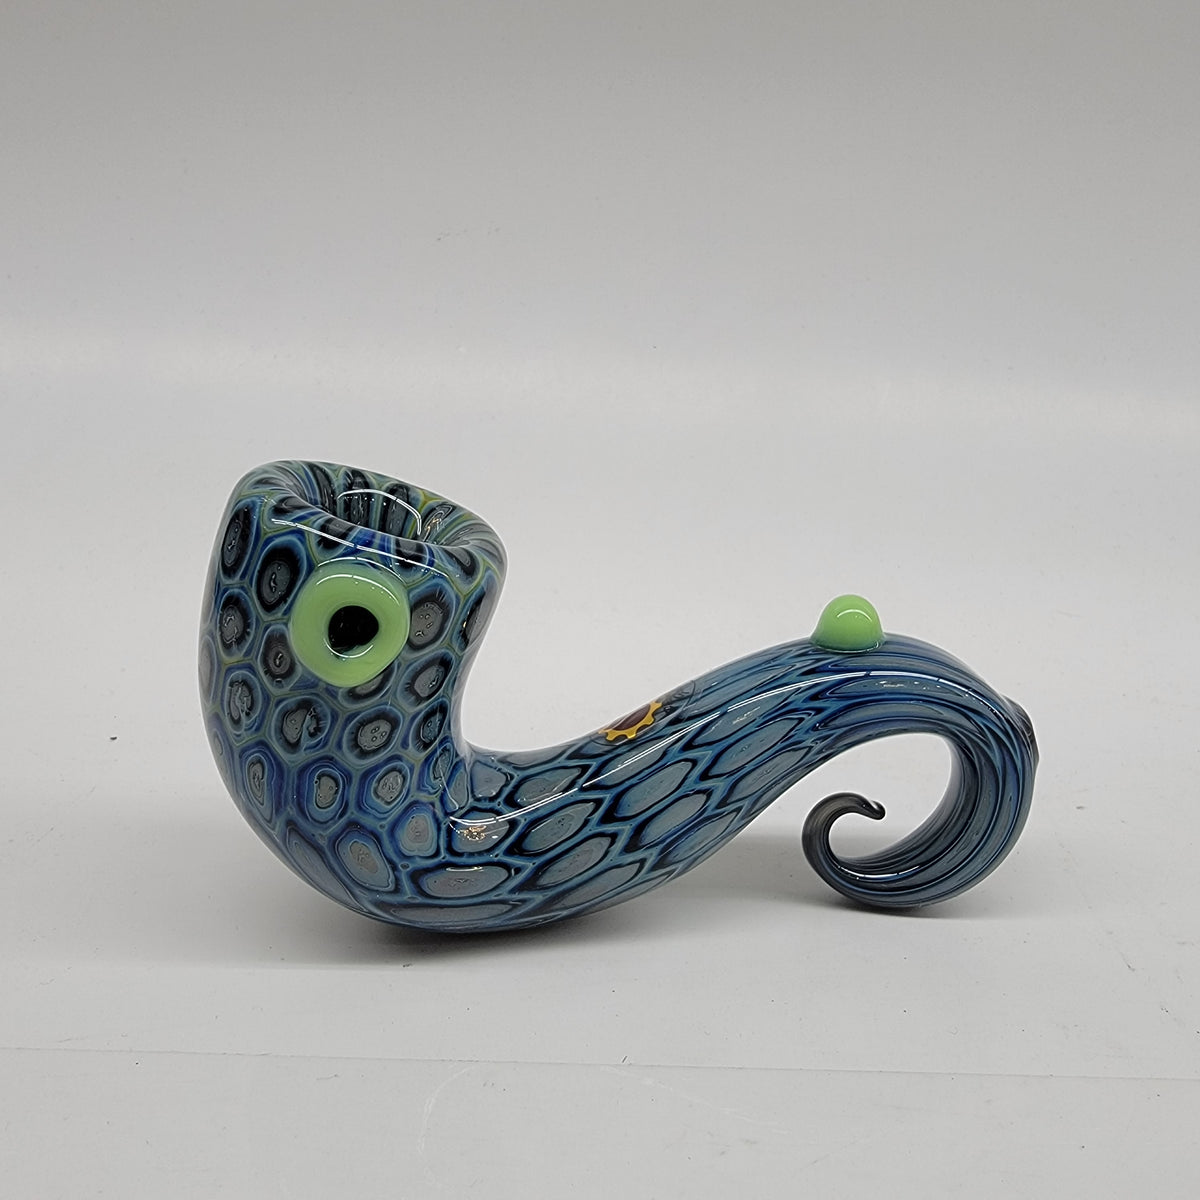 Bubble trap tentacle pipe